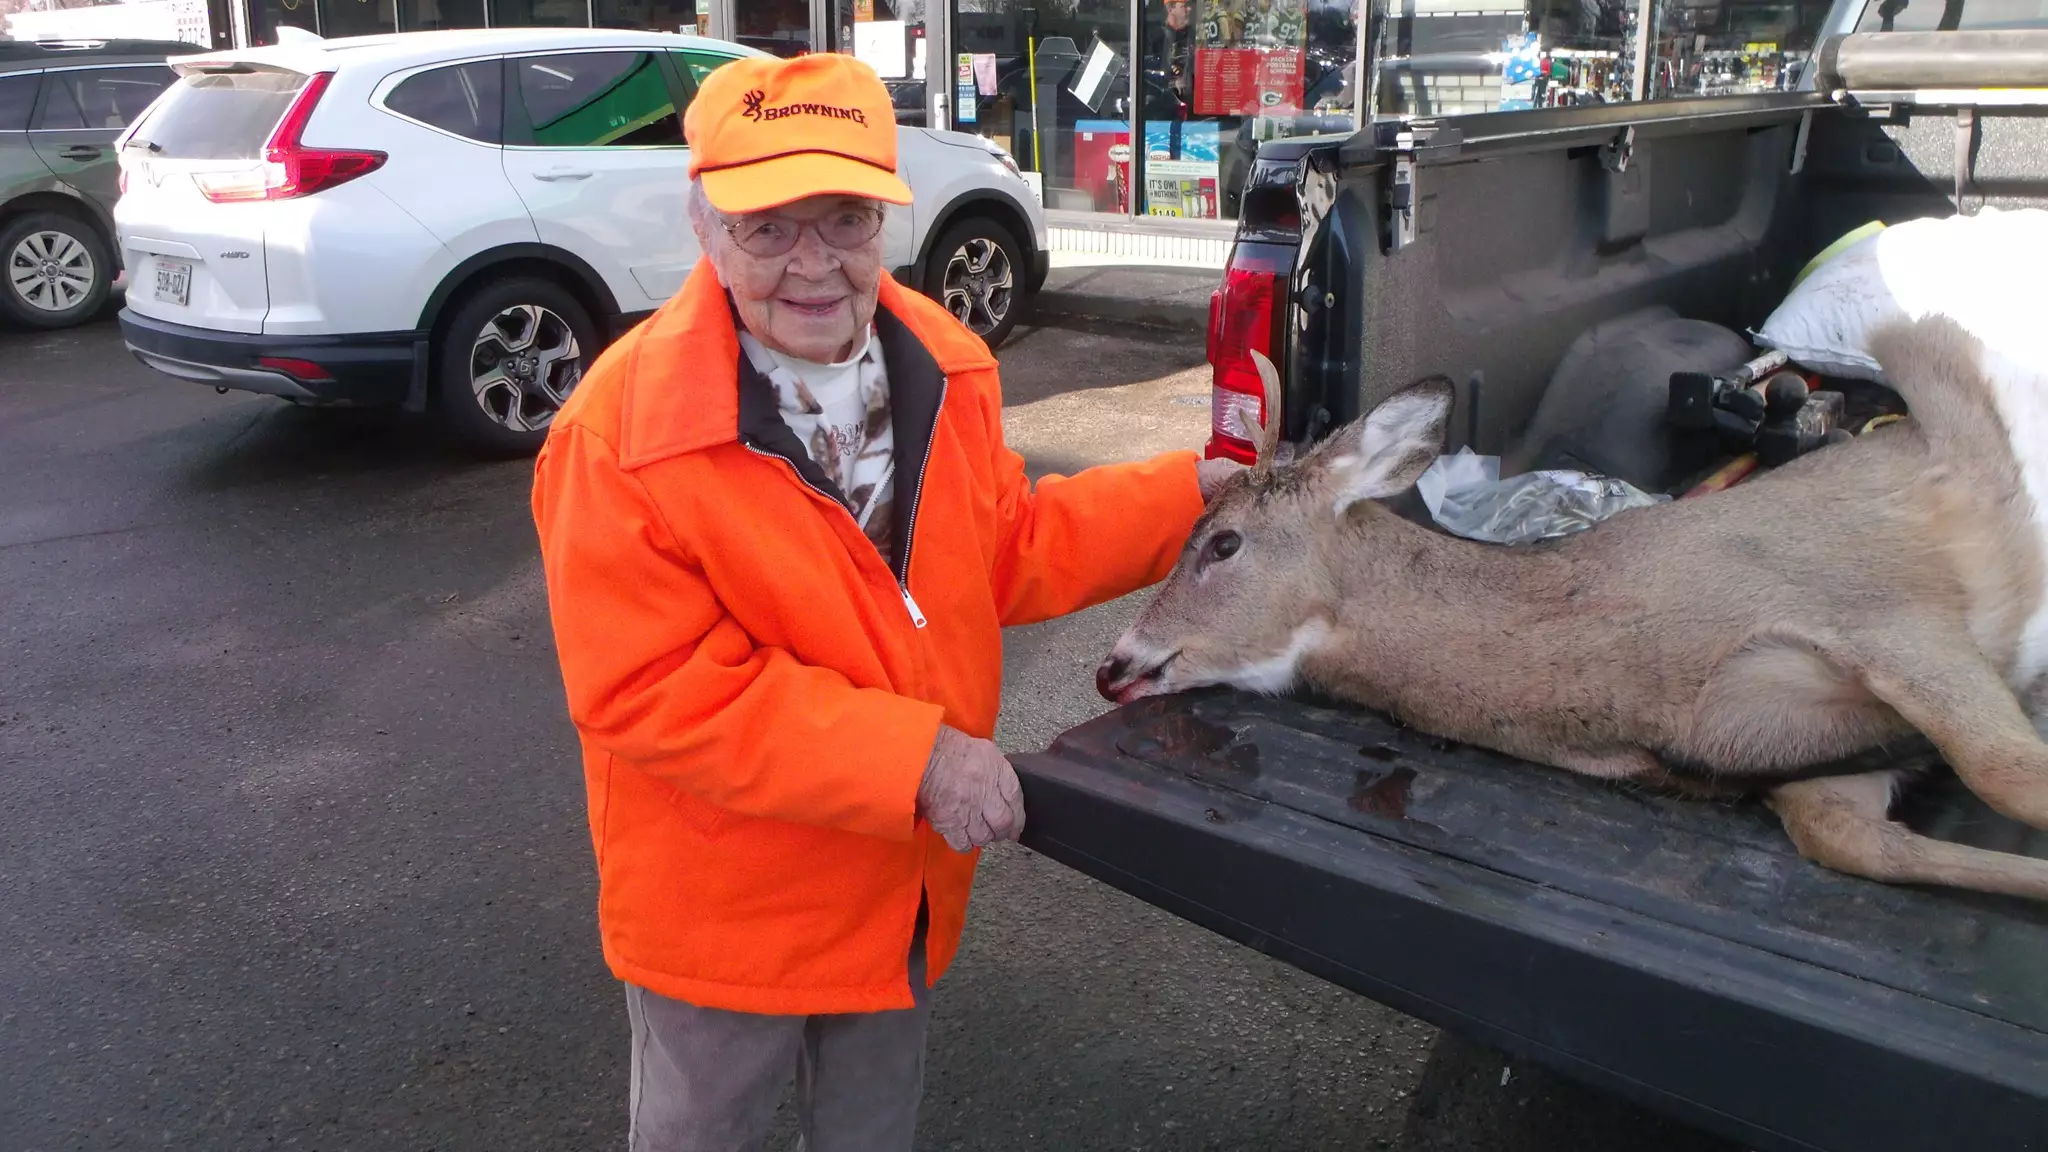 Woman, 104, Goes On First Hunt And Guns Down Deer